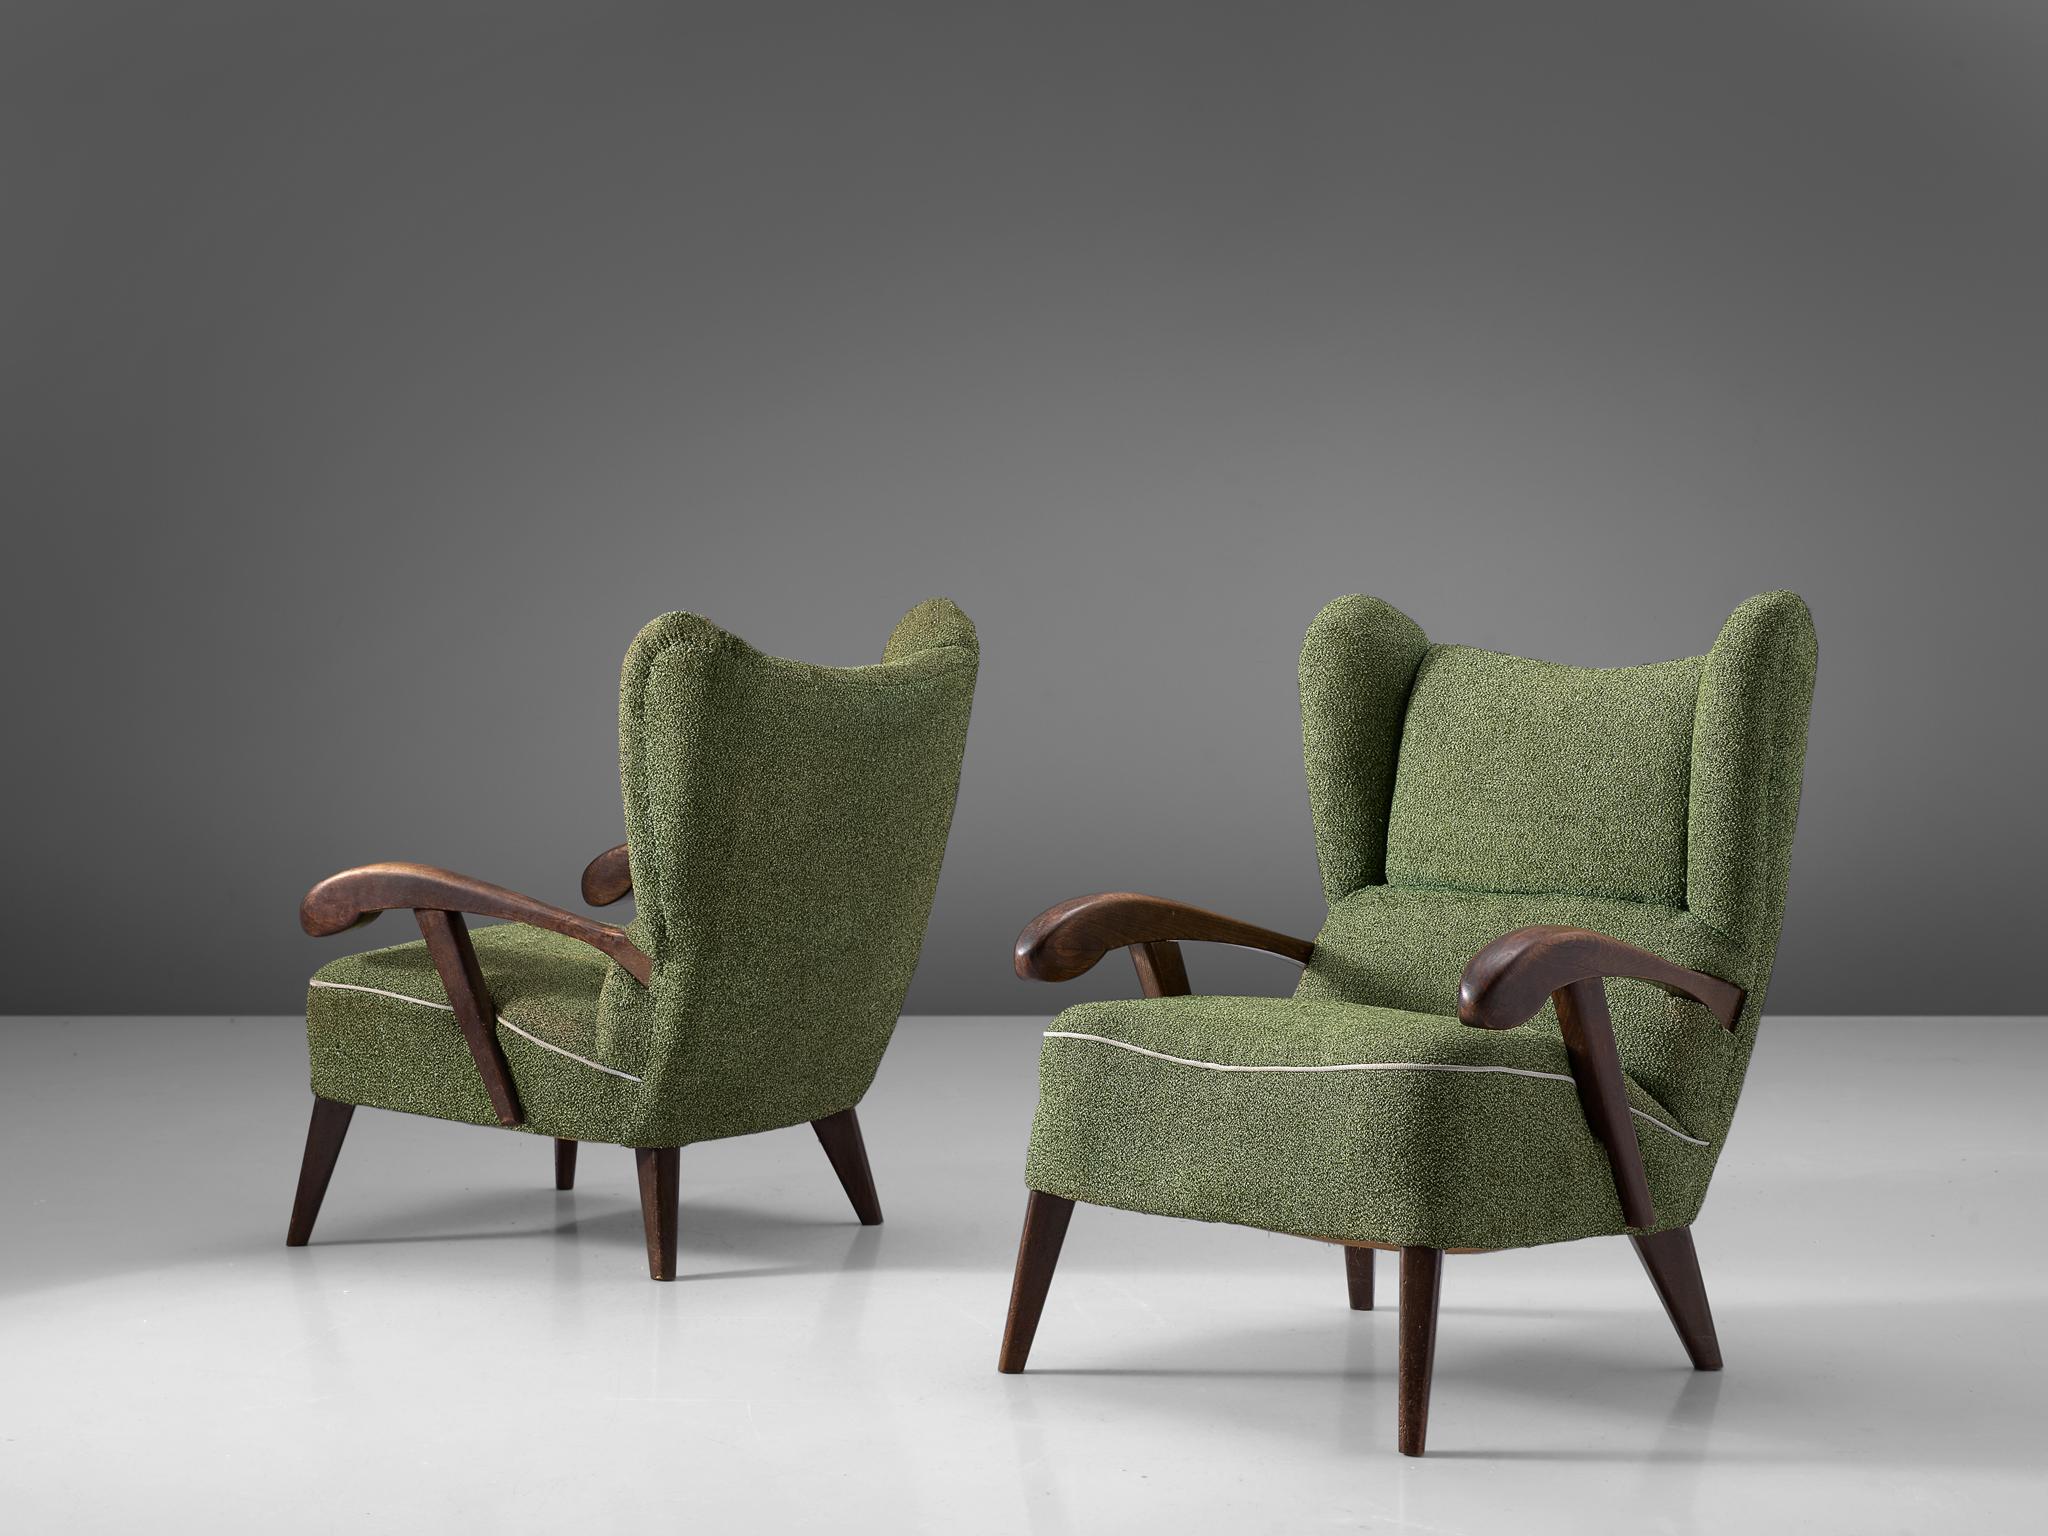 Set of two lounge chairs, in beech and fabric, Czech Republic, 1950s.

Elegant pair of two wingback chairs with solid beech frame. These armchairs show beautiful lines and curves. The grain of the stained wood is nicely visible, especially on the